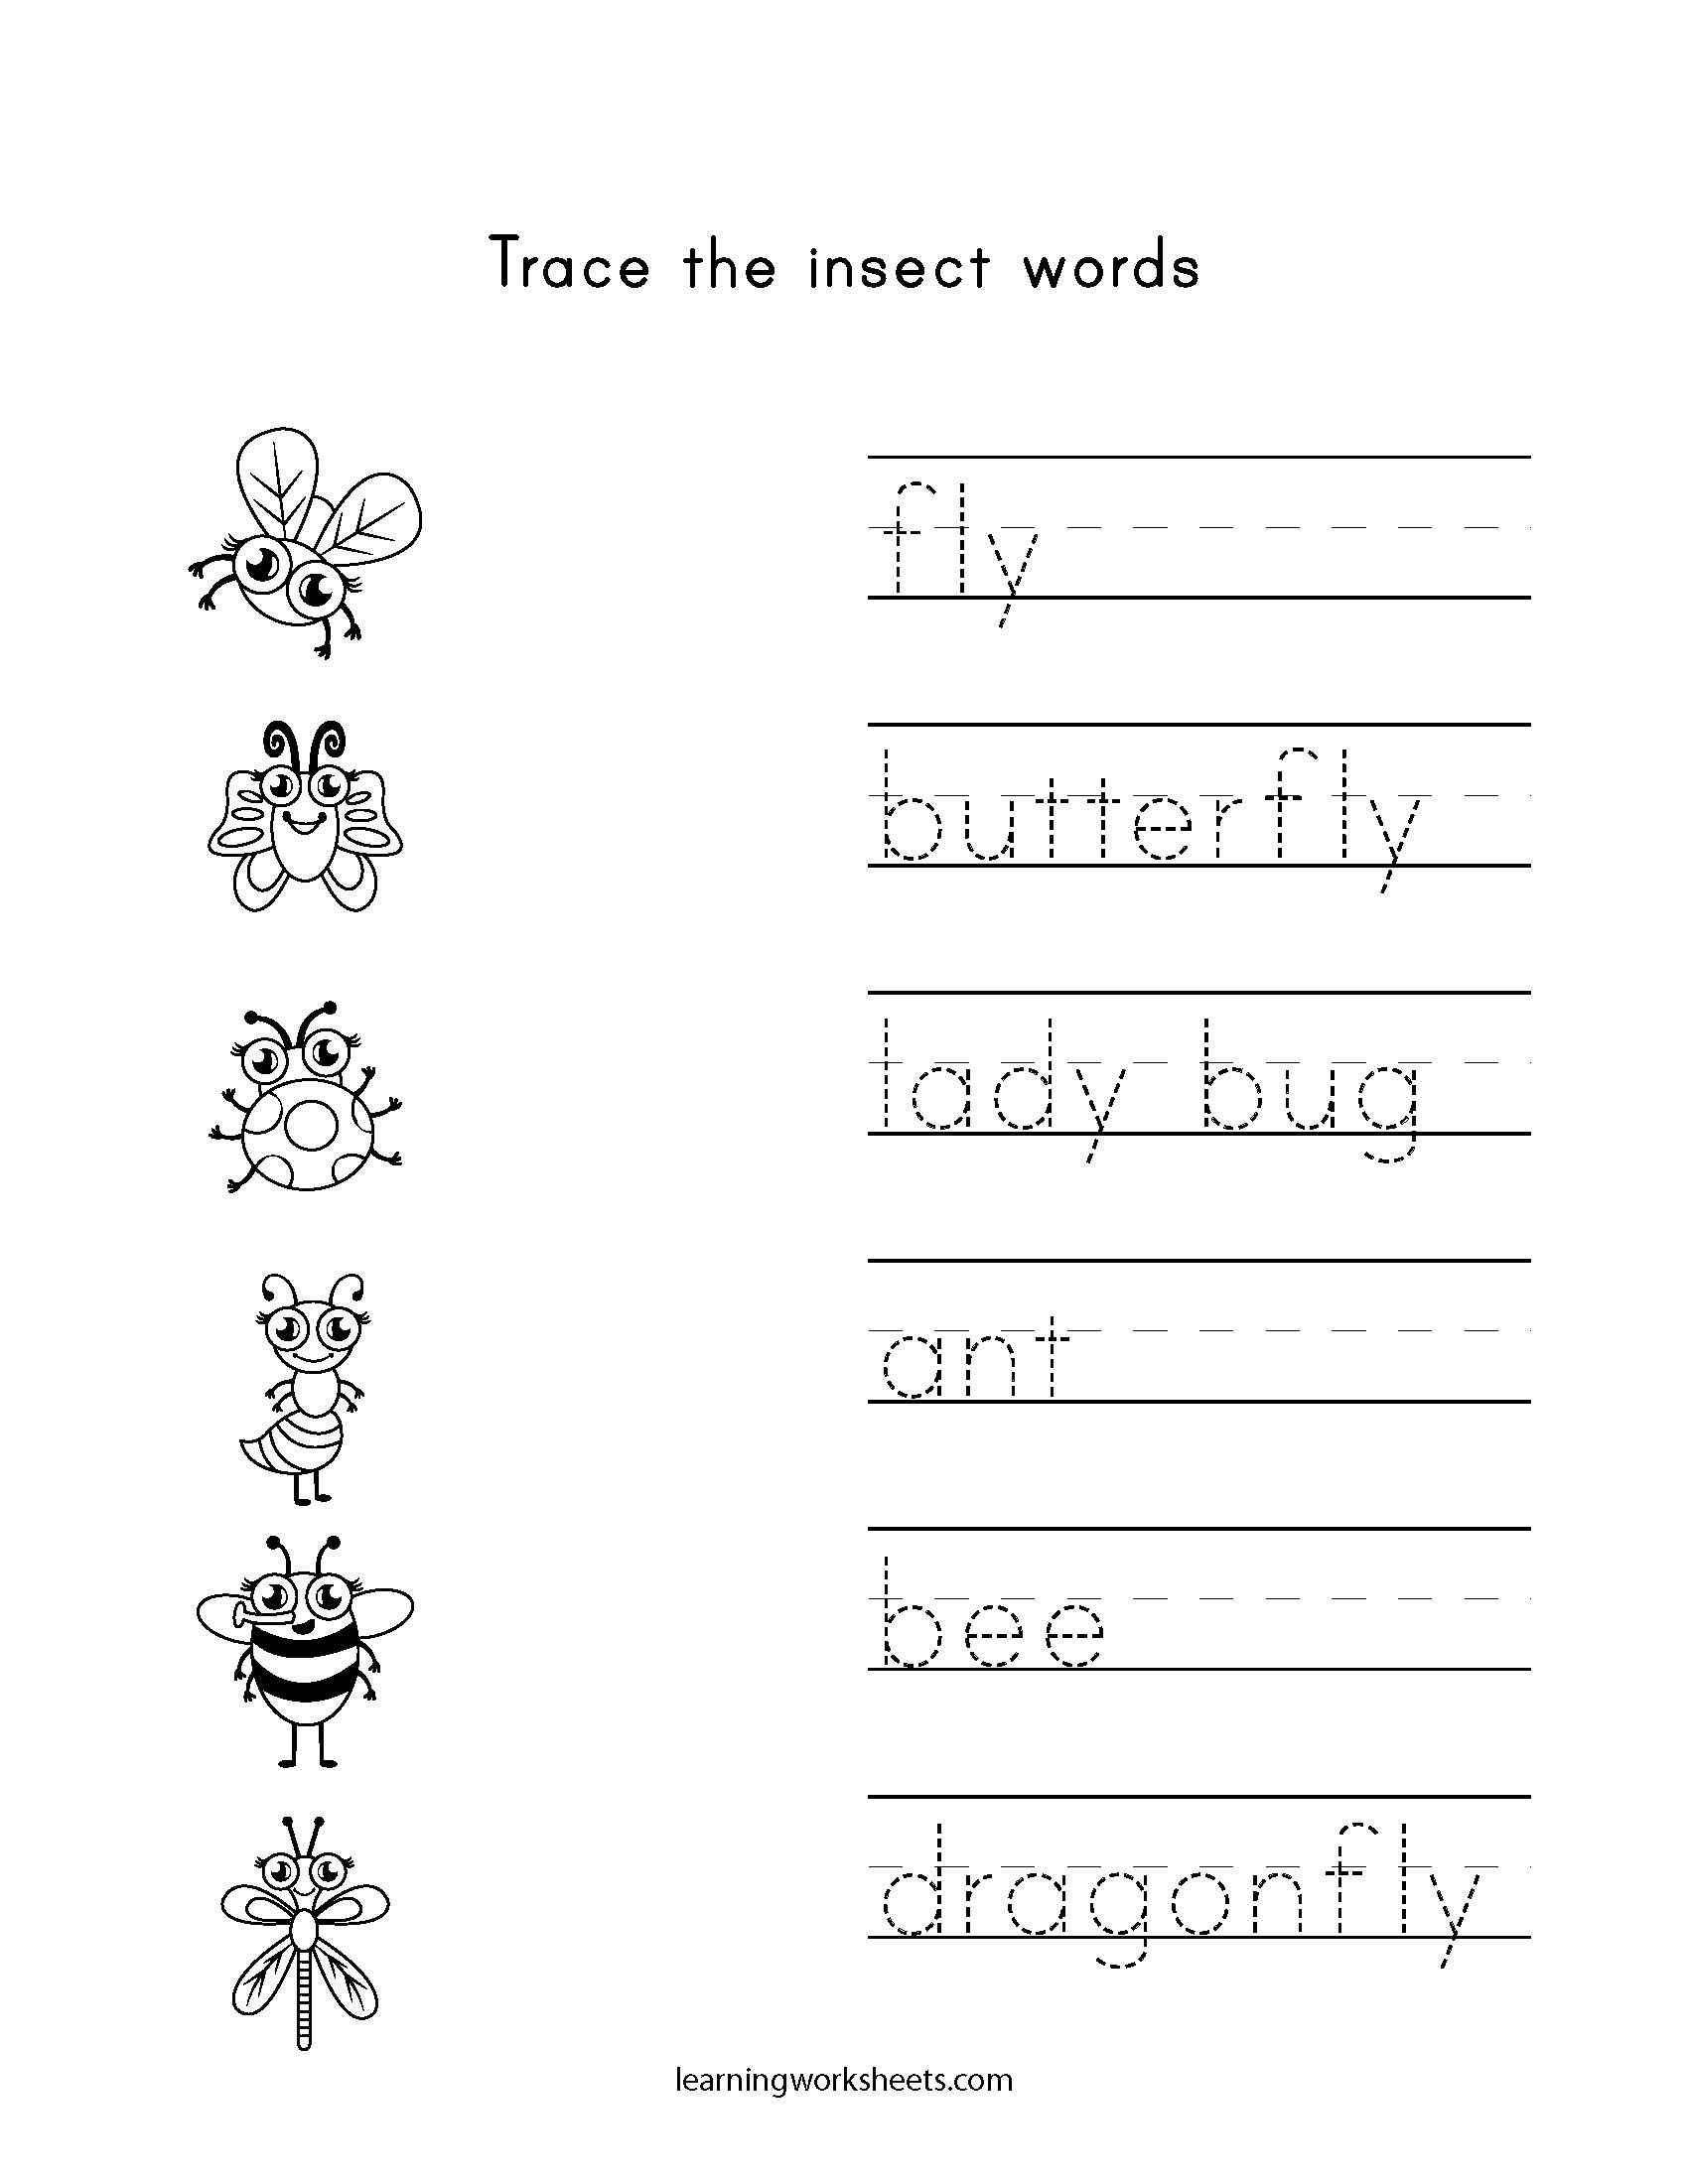 trace-the-insect-words-learning-worksheets-insects